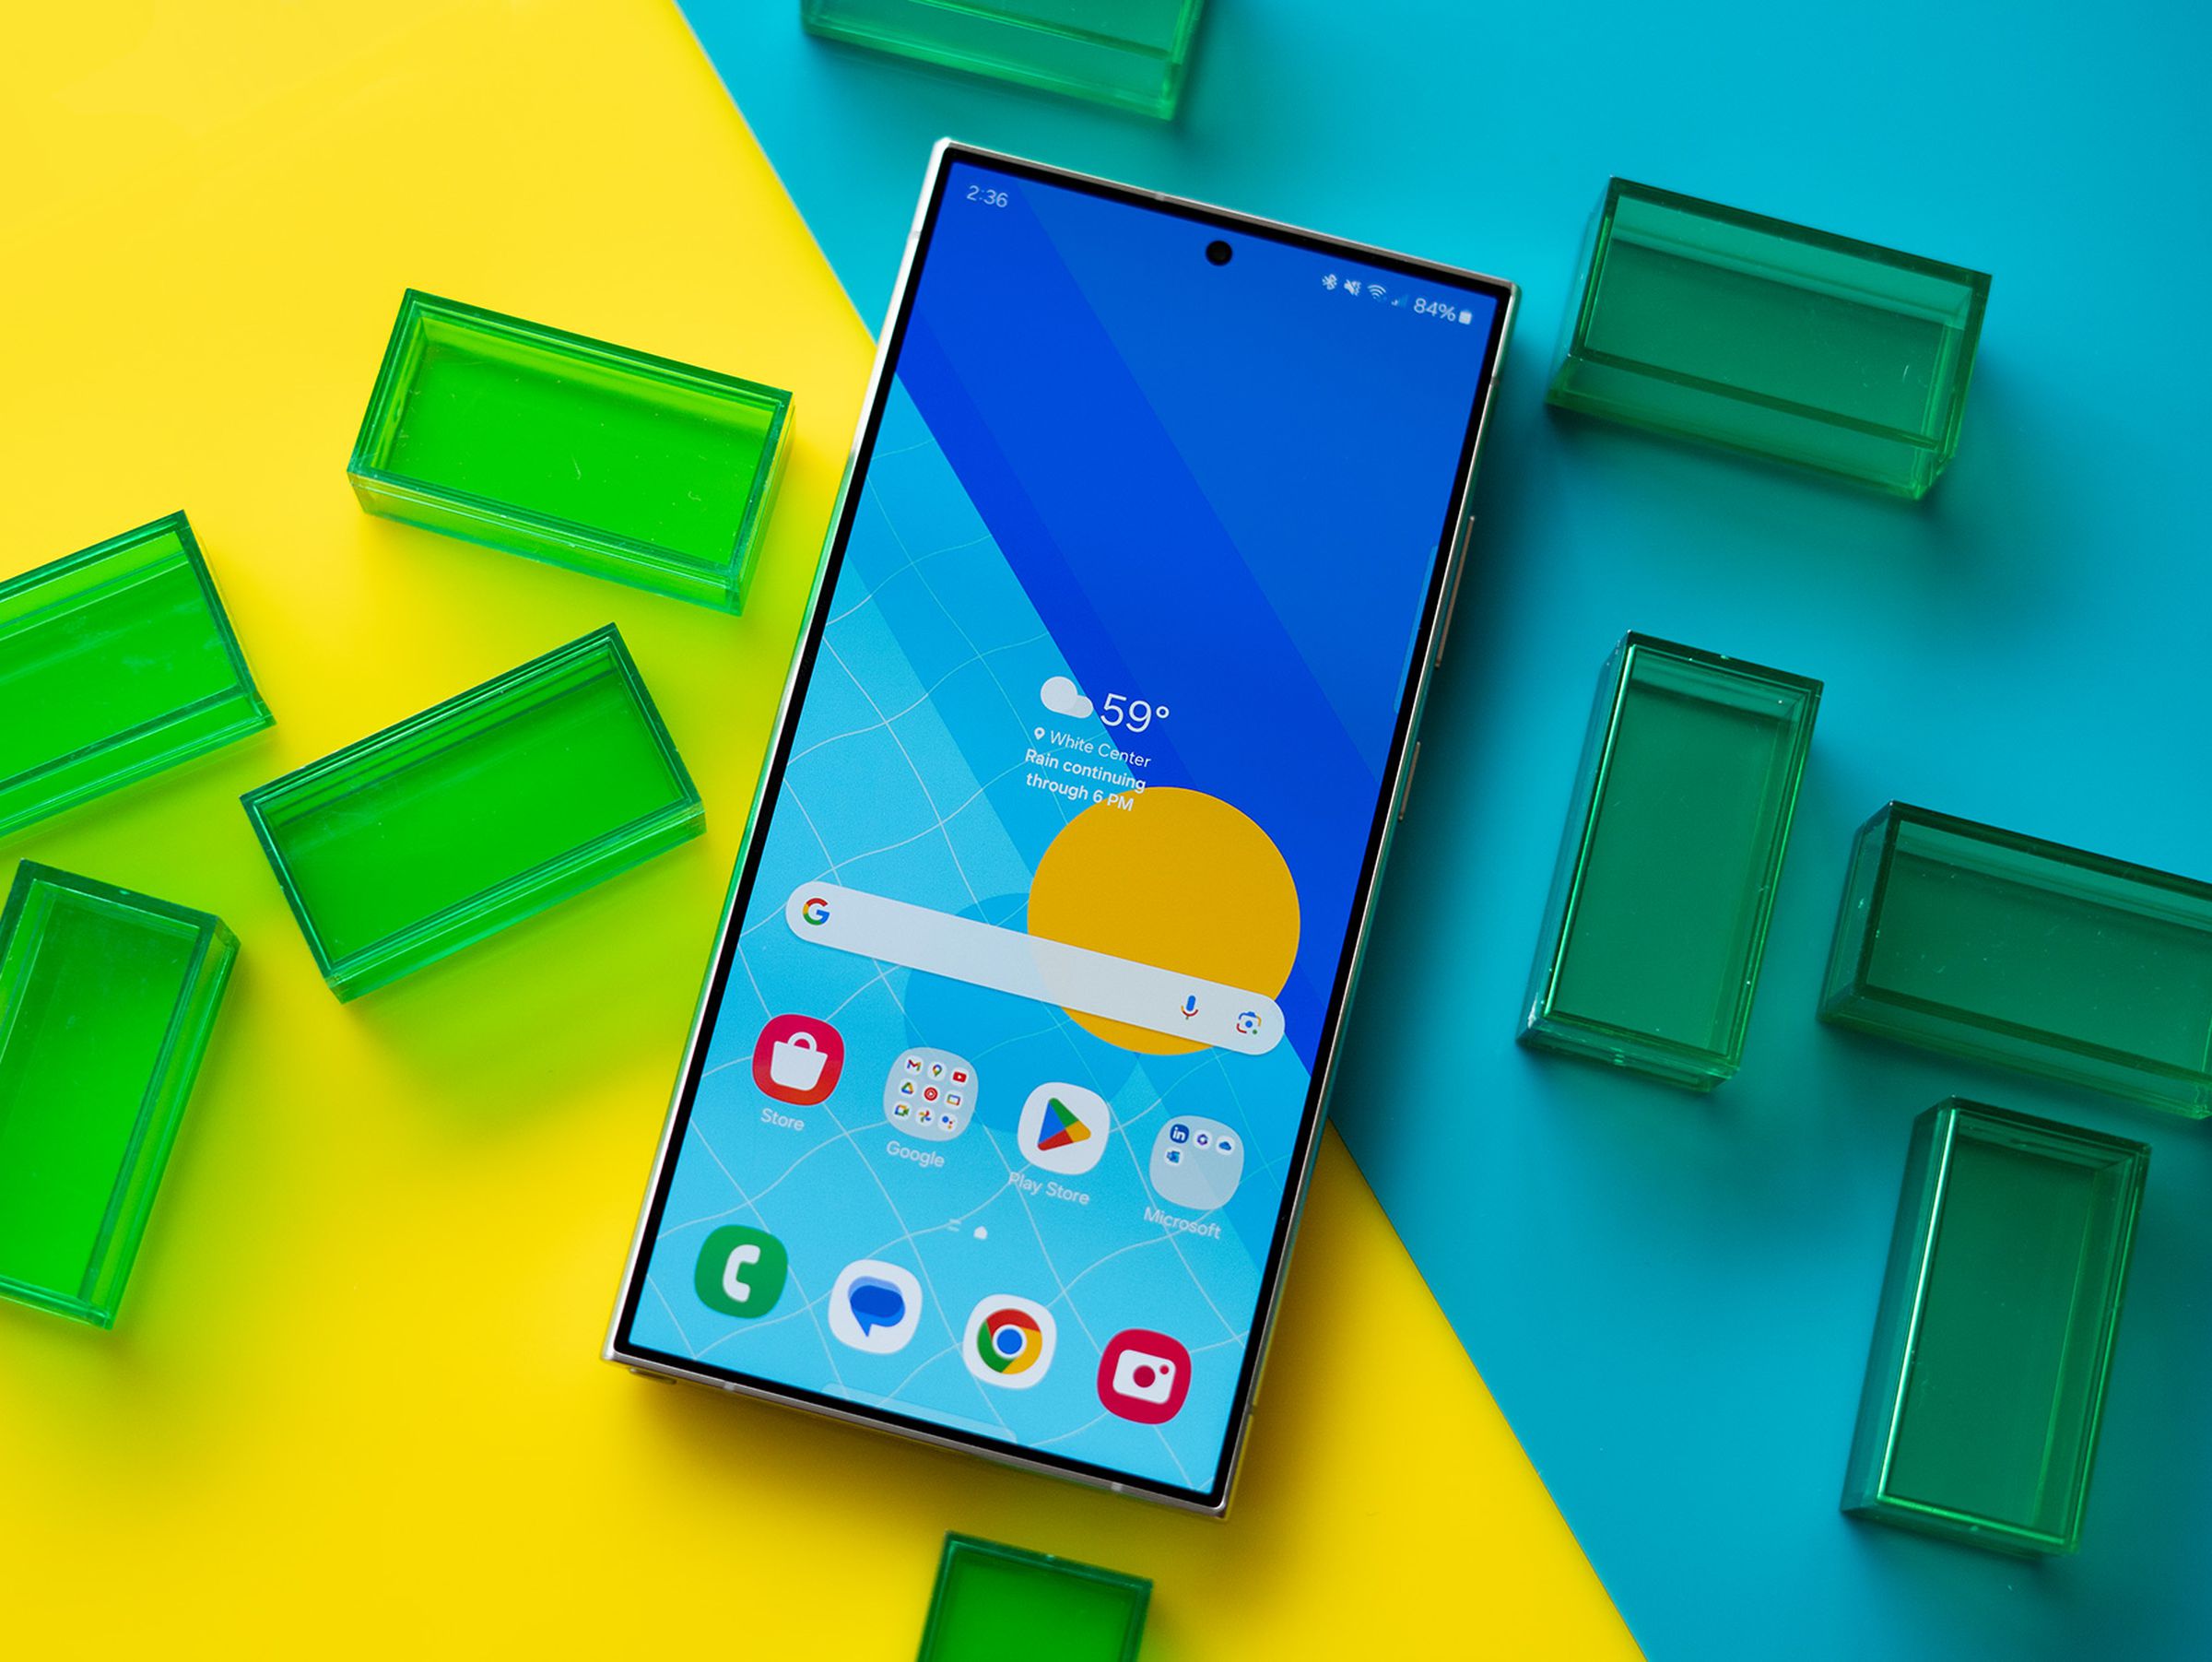 Samsung Galaxy S24 Ultra showing a blue and yellow homescreen, on a blue and yellow background with green translucent rectangles.